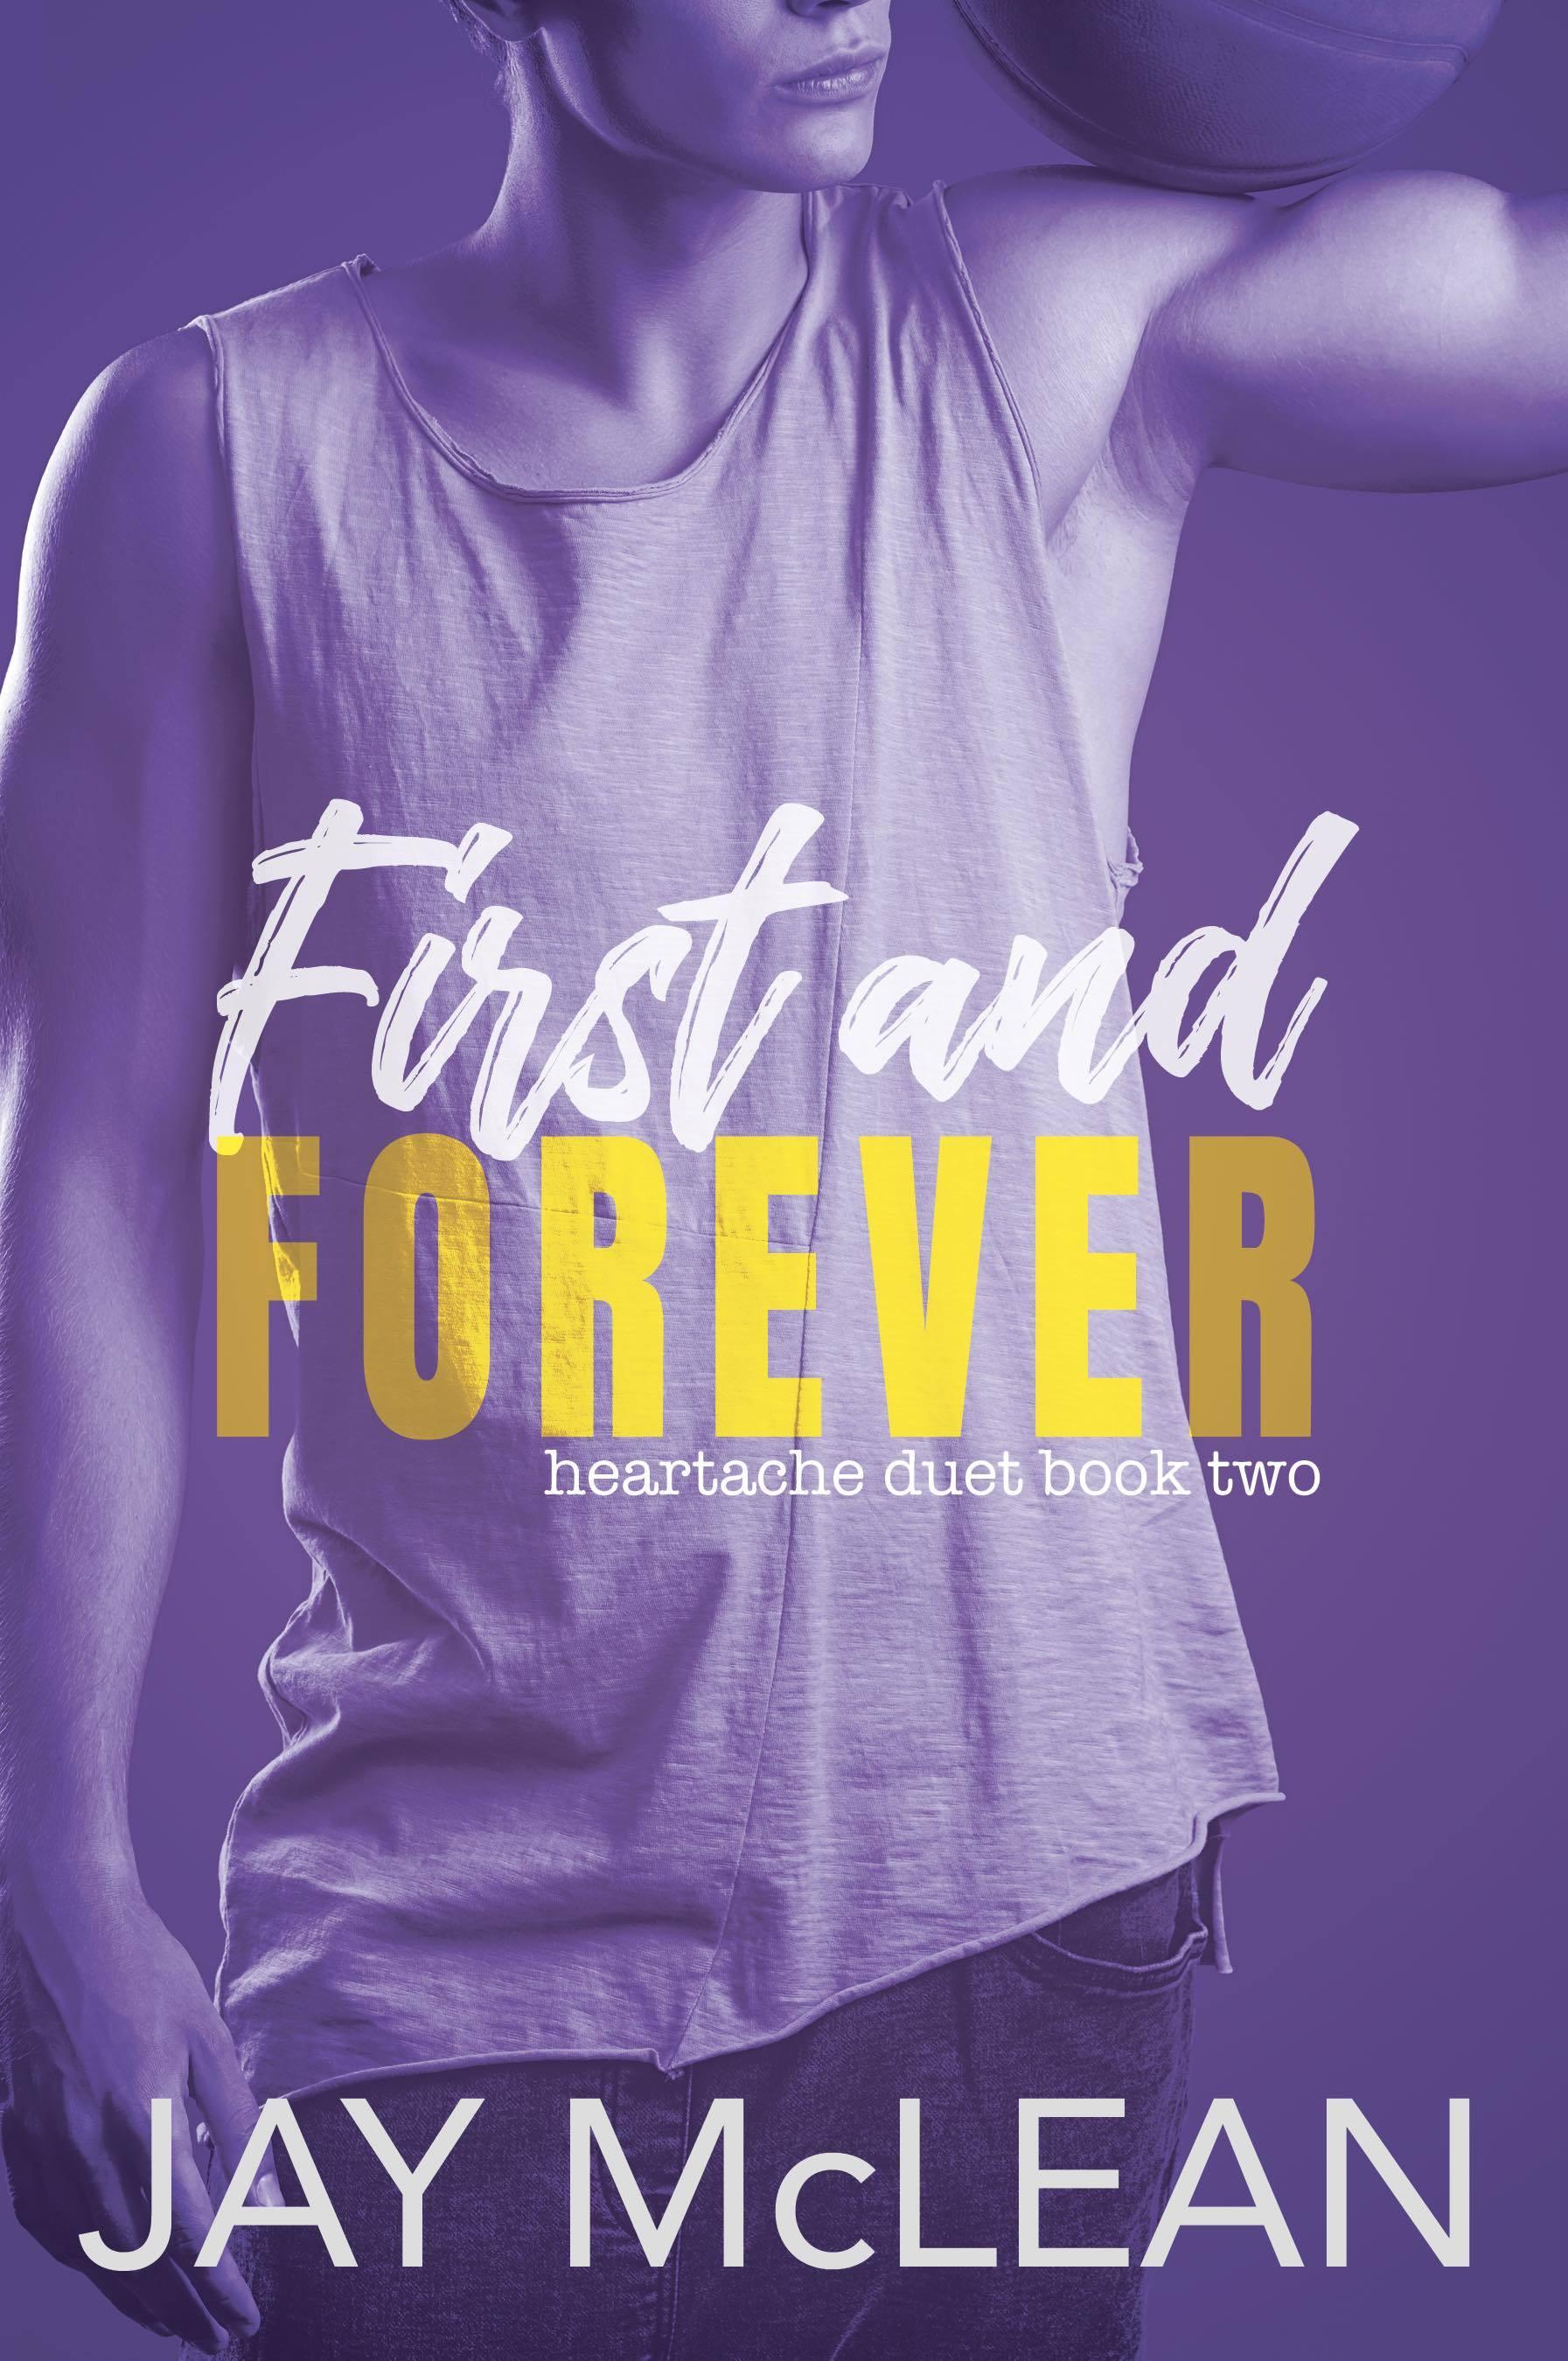 First and Forever